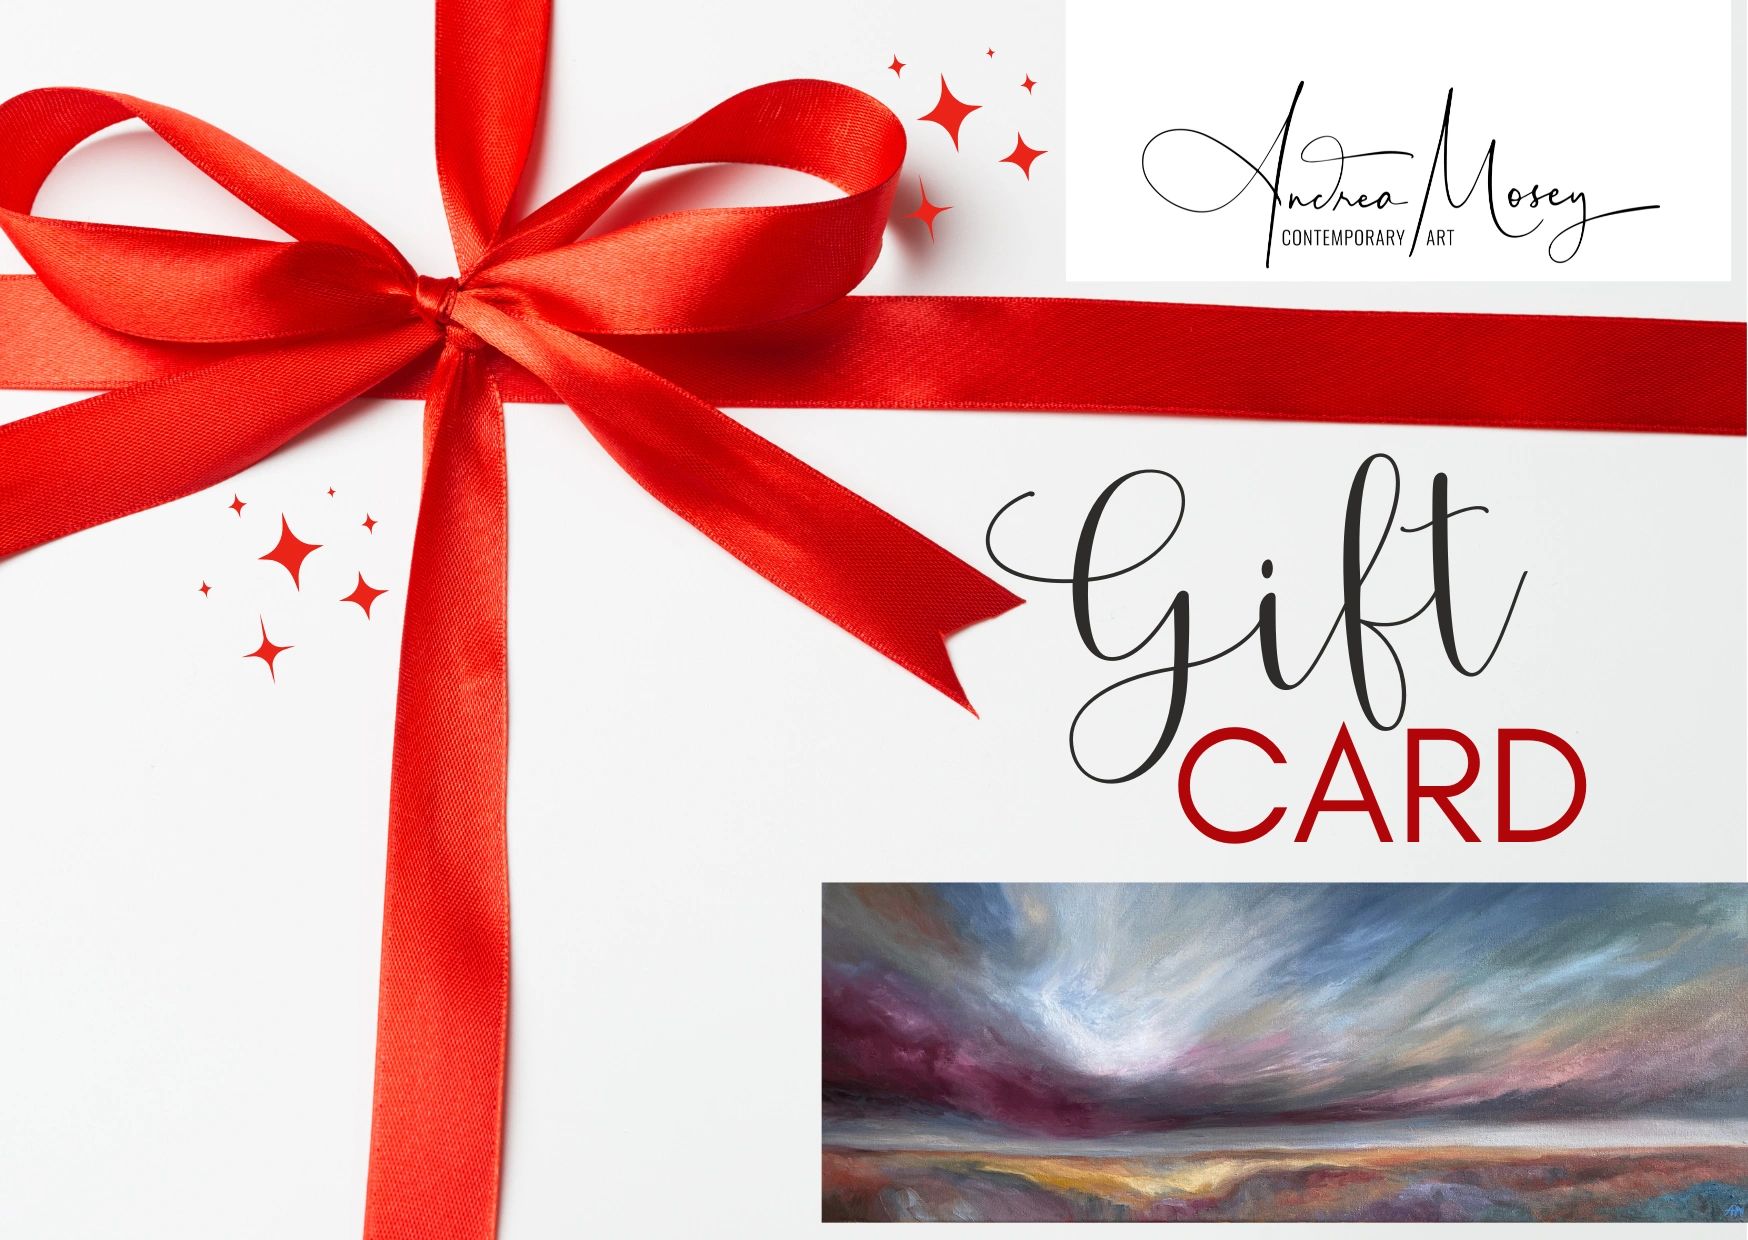 Gift card Andrea Mosey Art